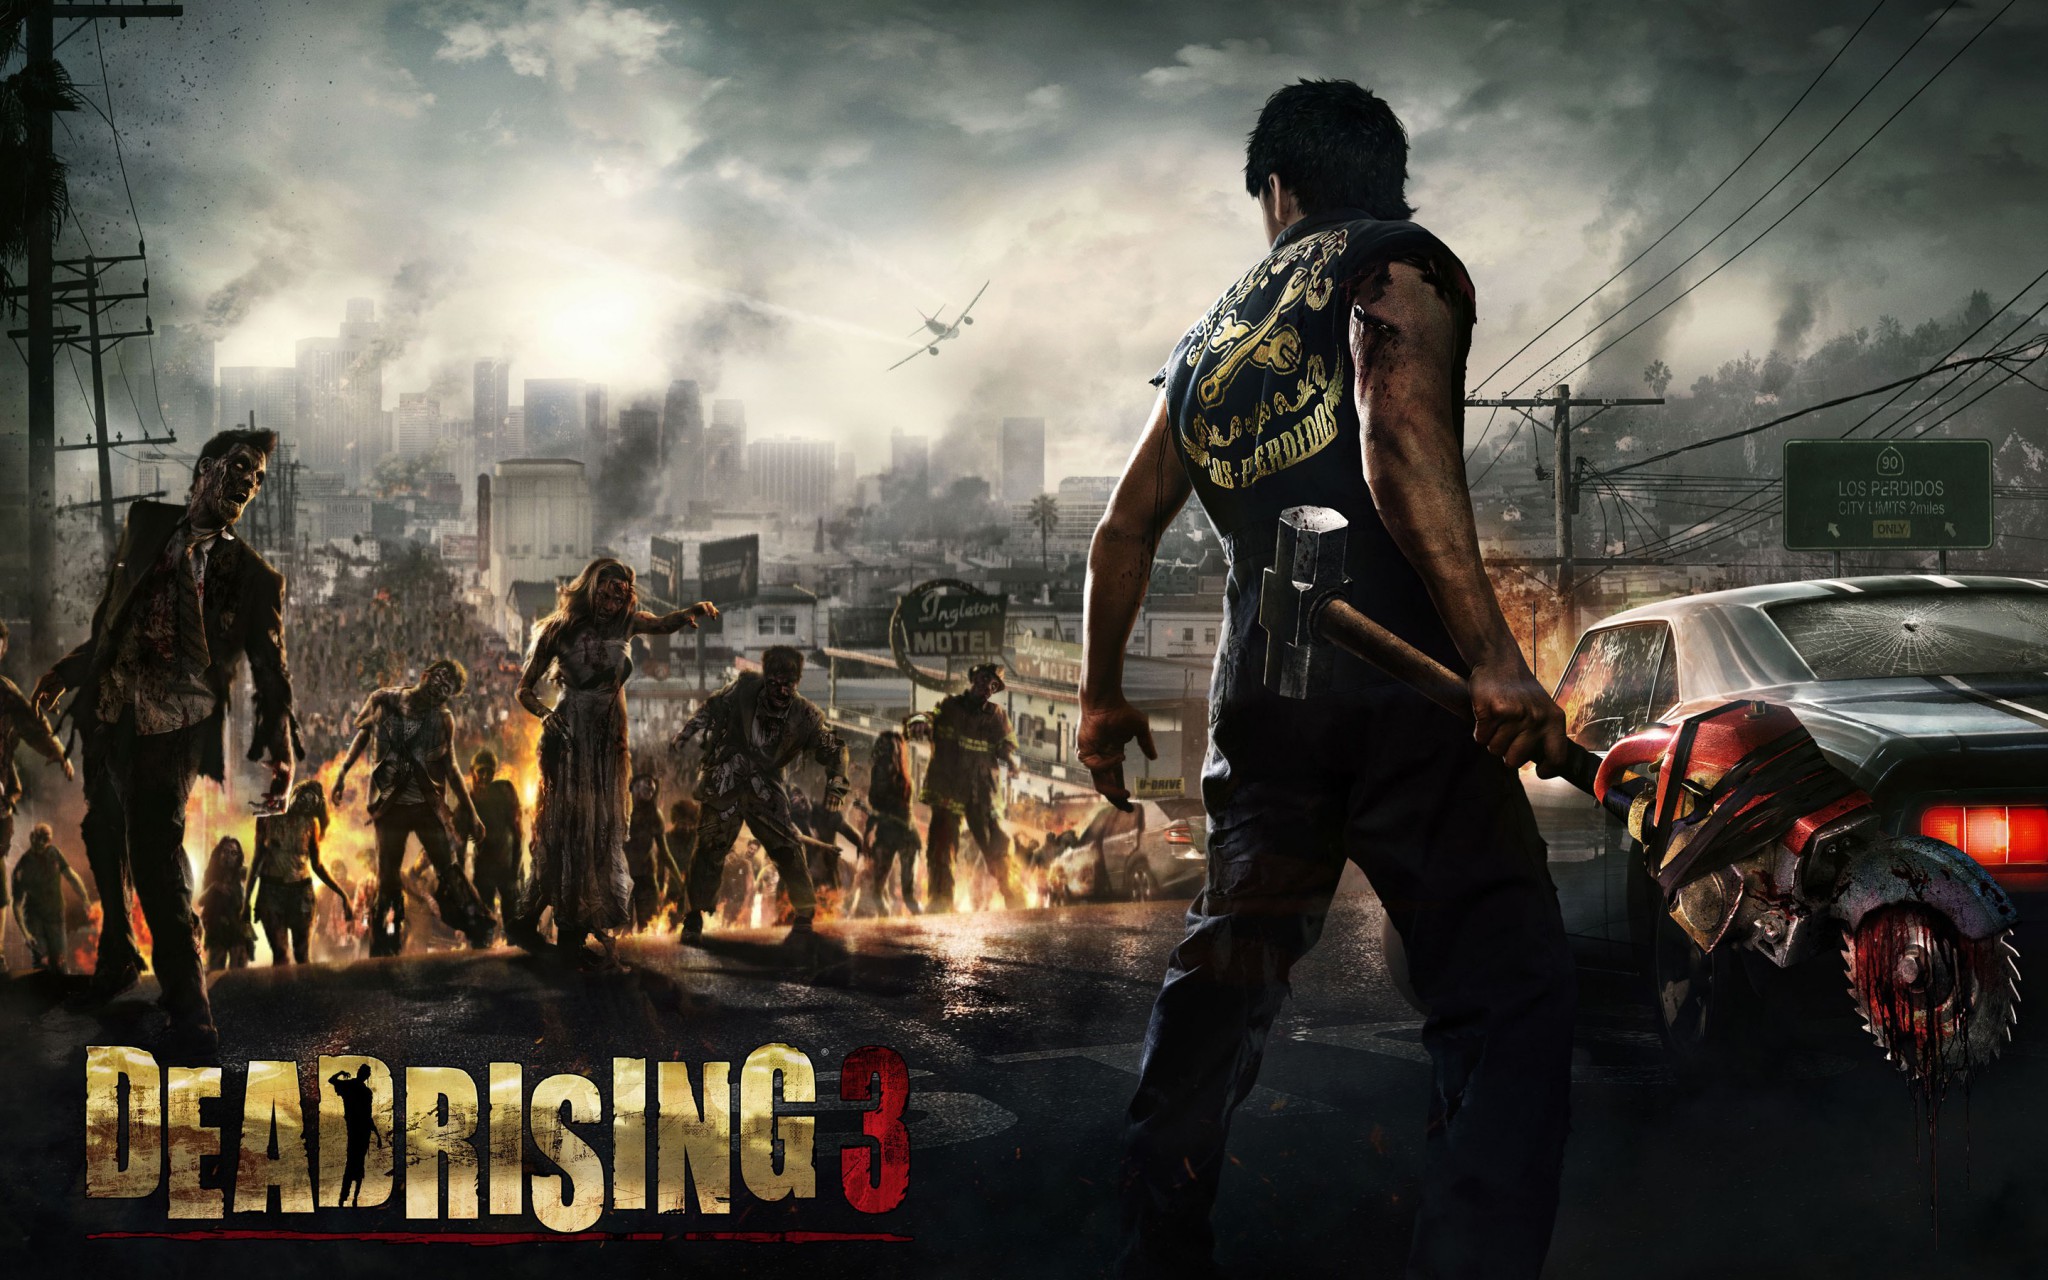 Dead-Rising-Watchtower-Movie-Is-Set-to-Debut-This-March-470150-2